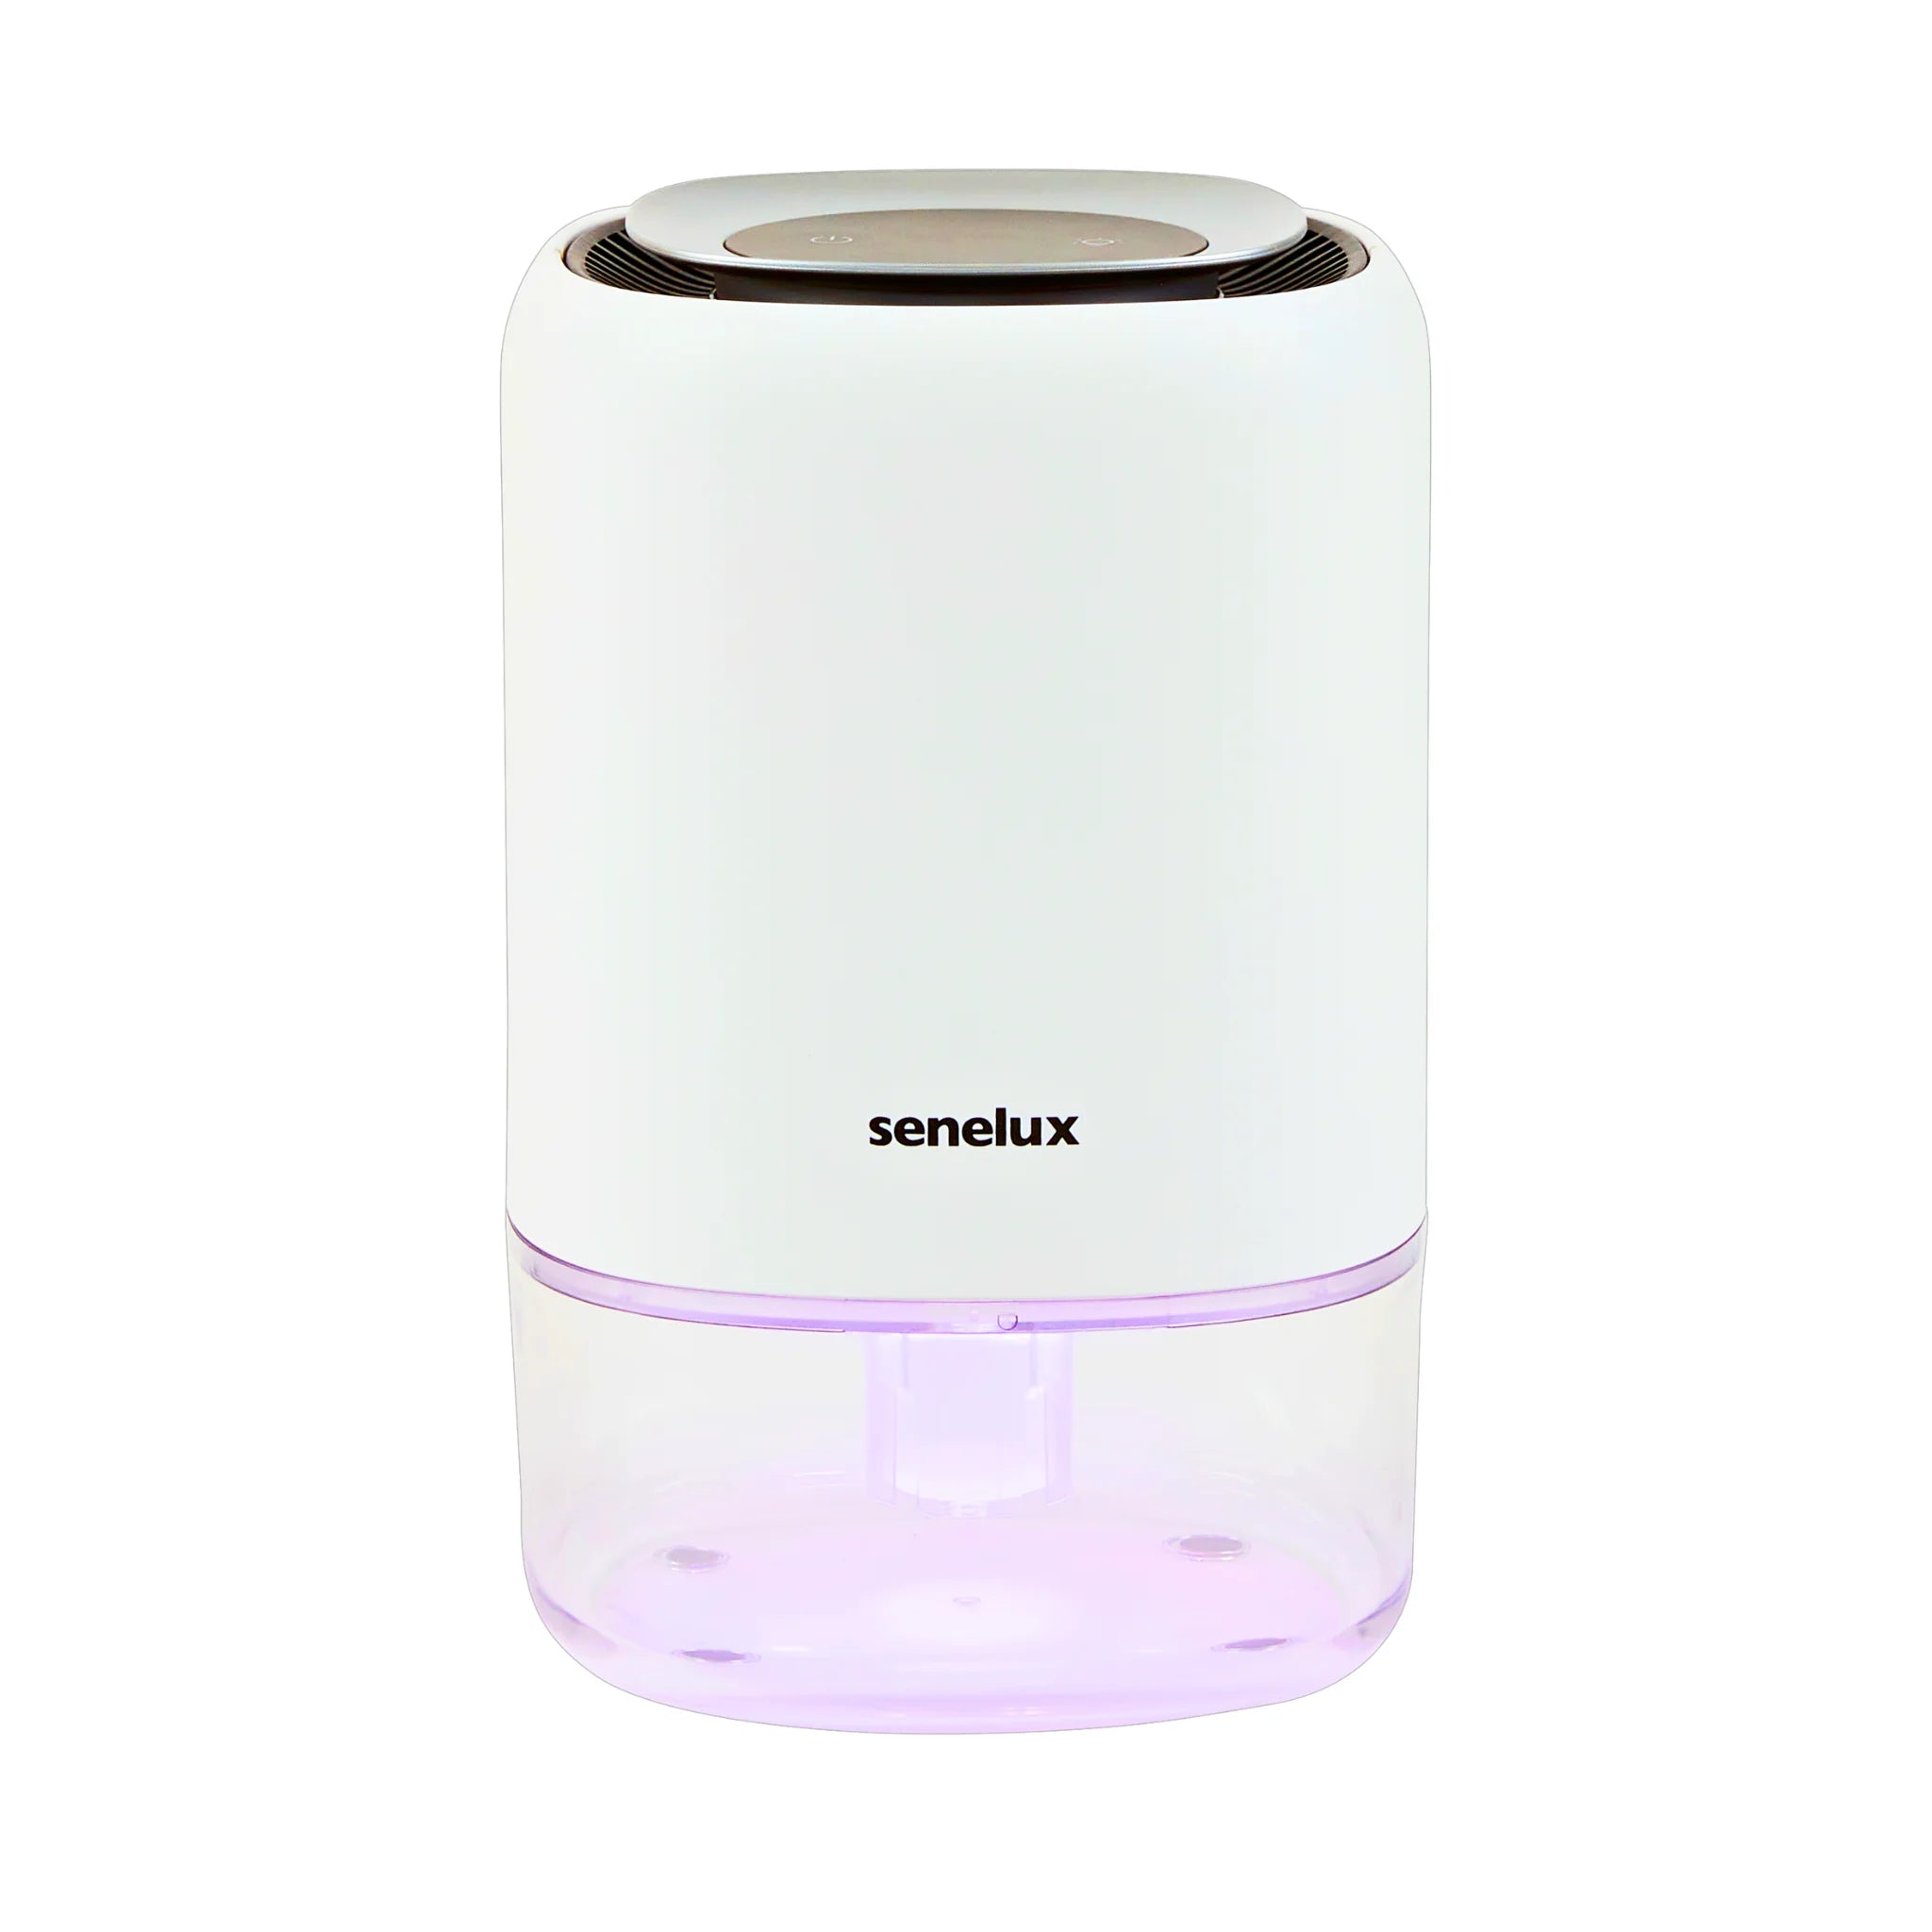 1100ml dehumidifier fully switched on with colour changing LED lights currently showing the pink colour vibrantly.